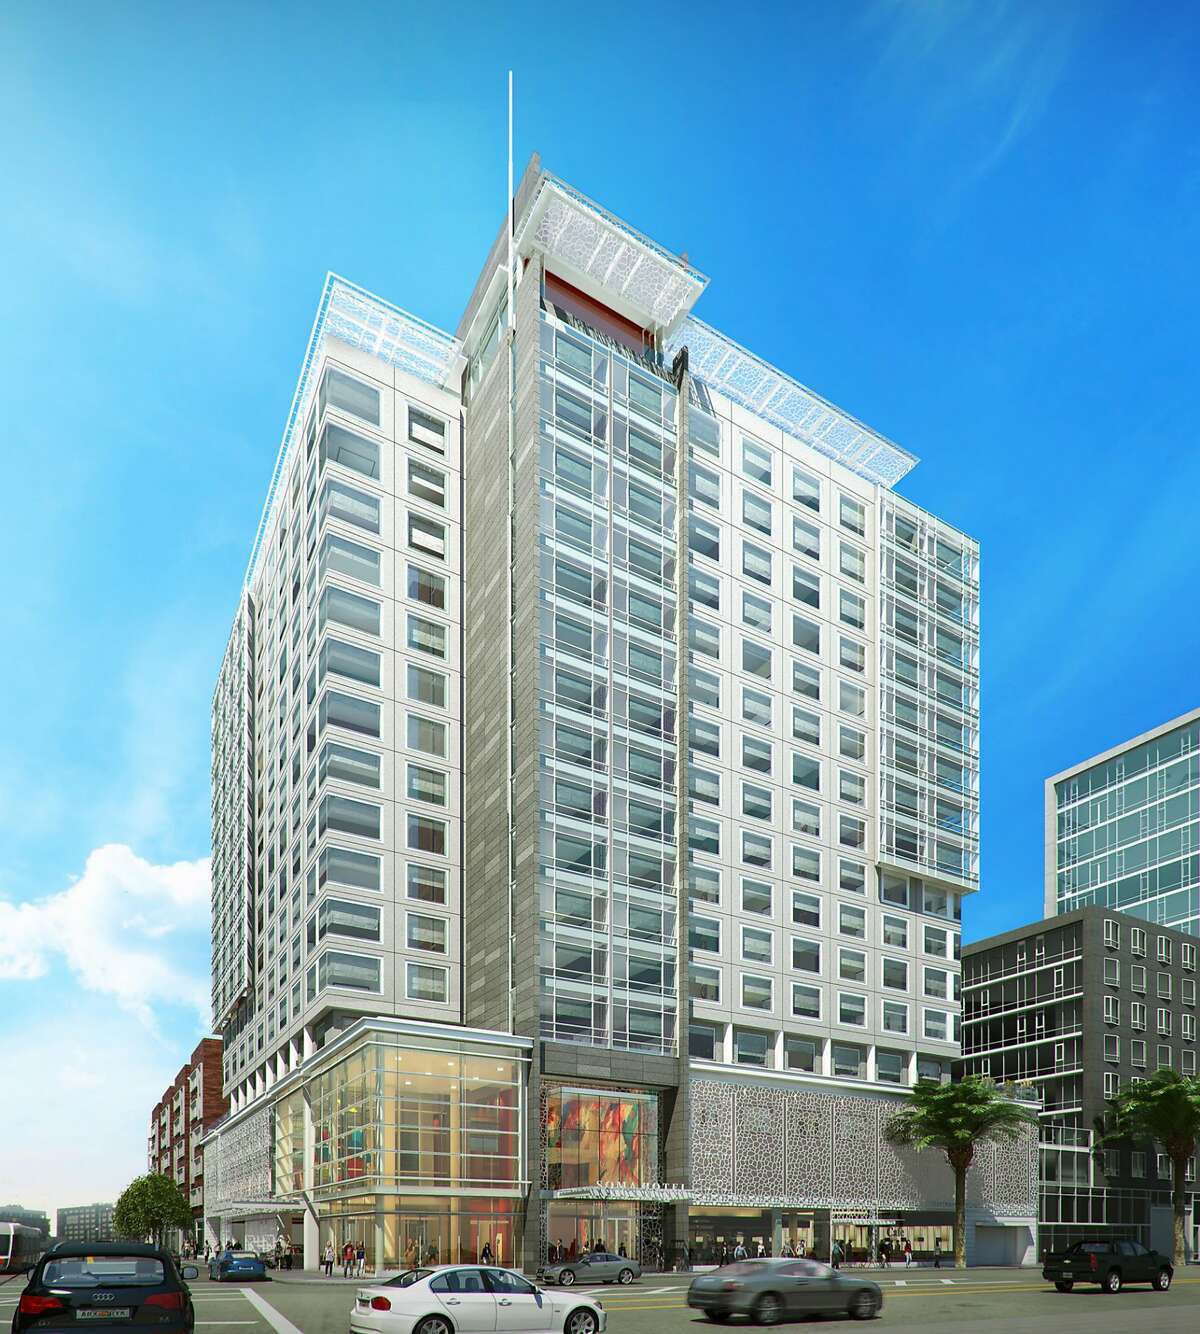 The 250-room, 17 story hotel will include a streetside caf�, and� rooftop lounge and garden.